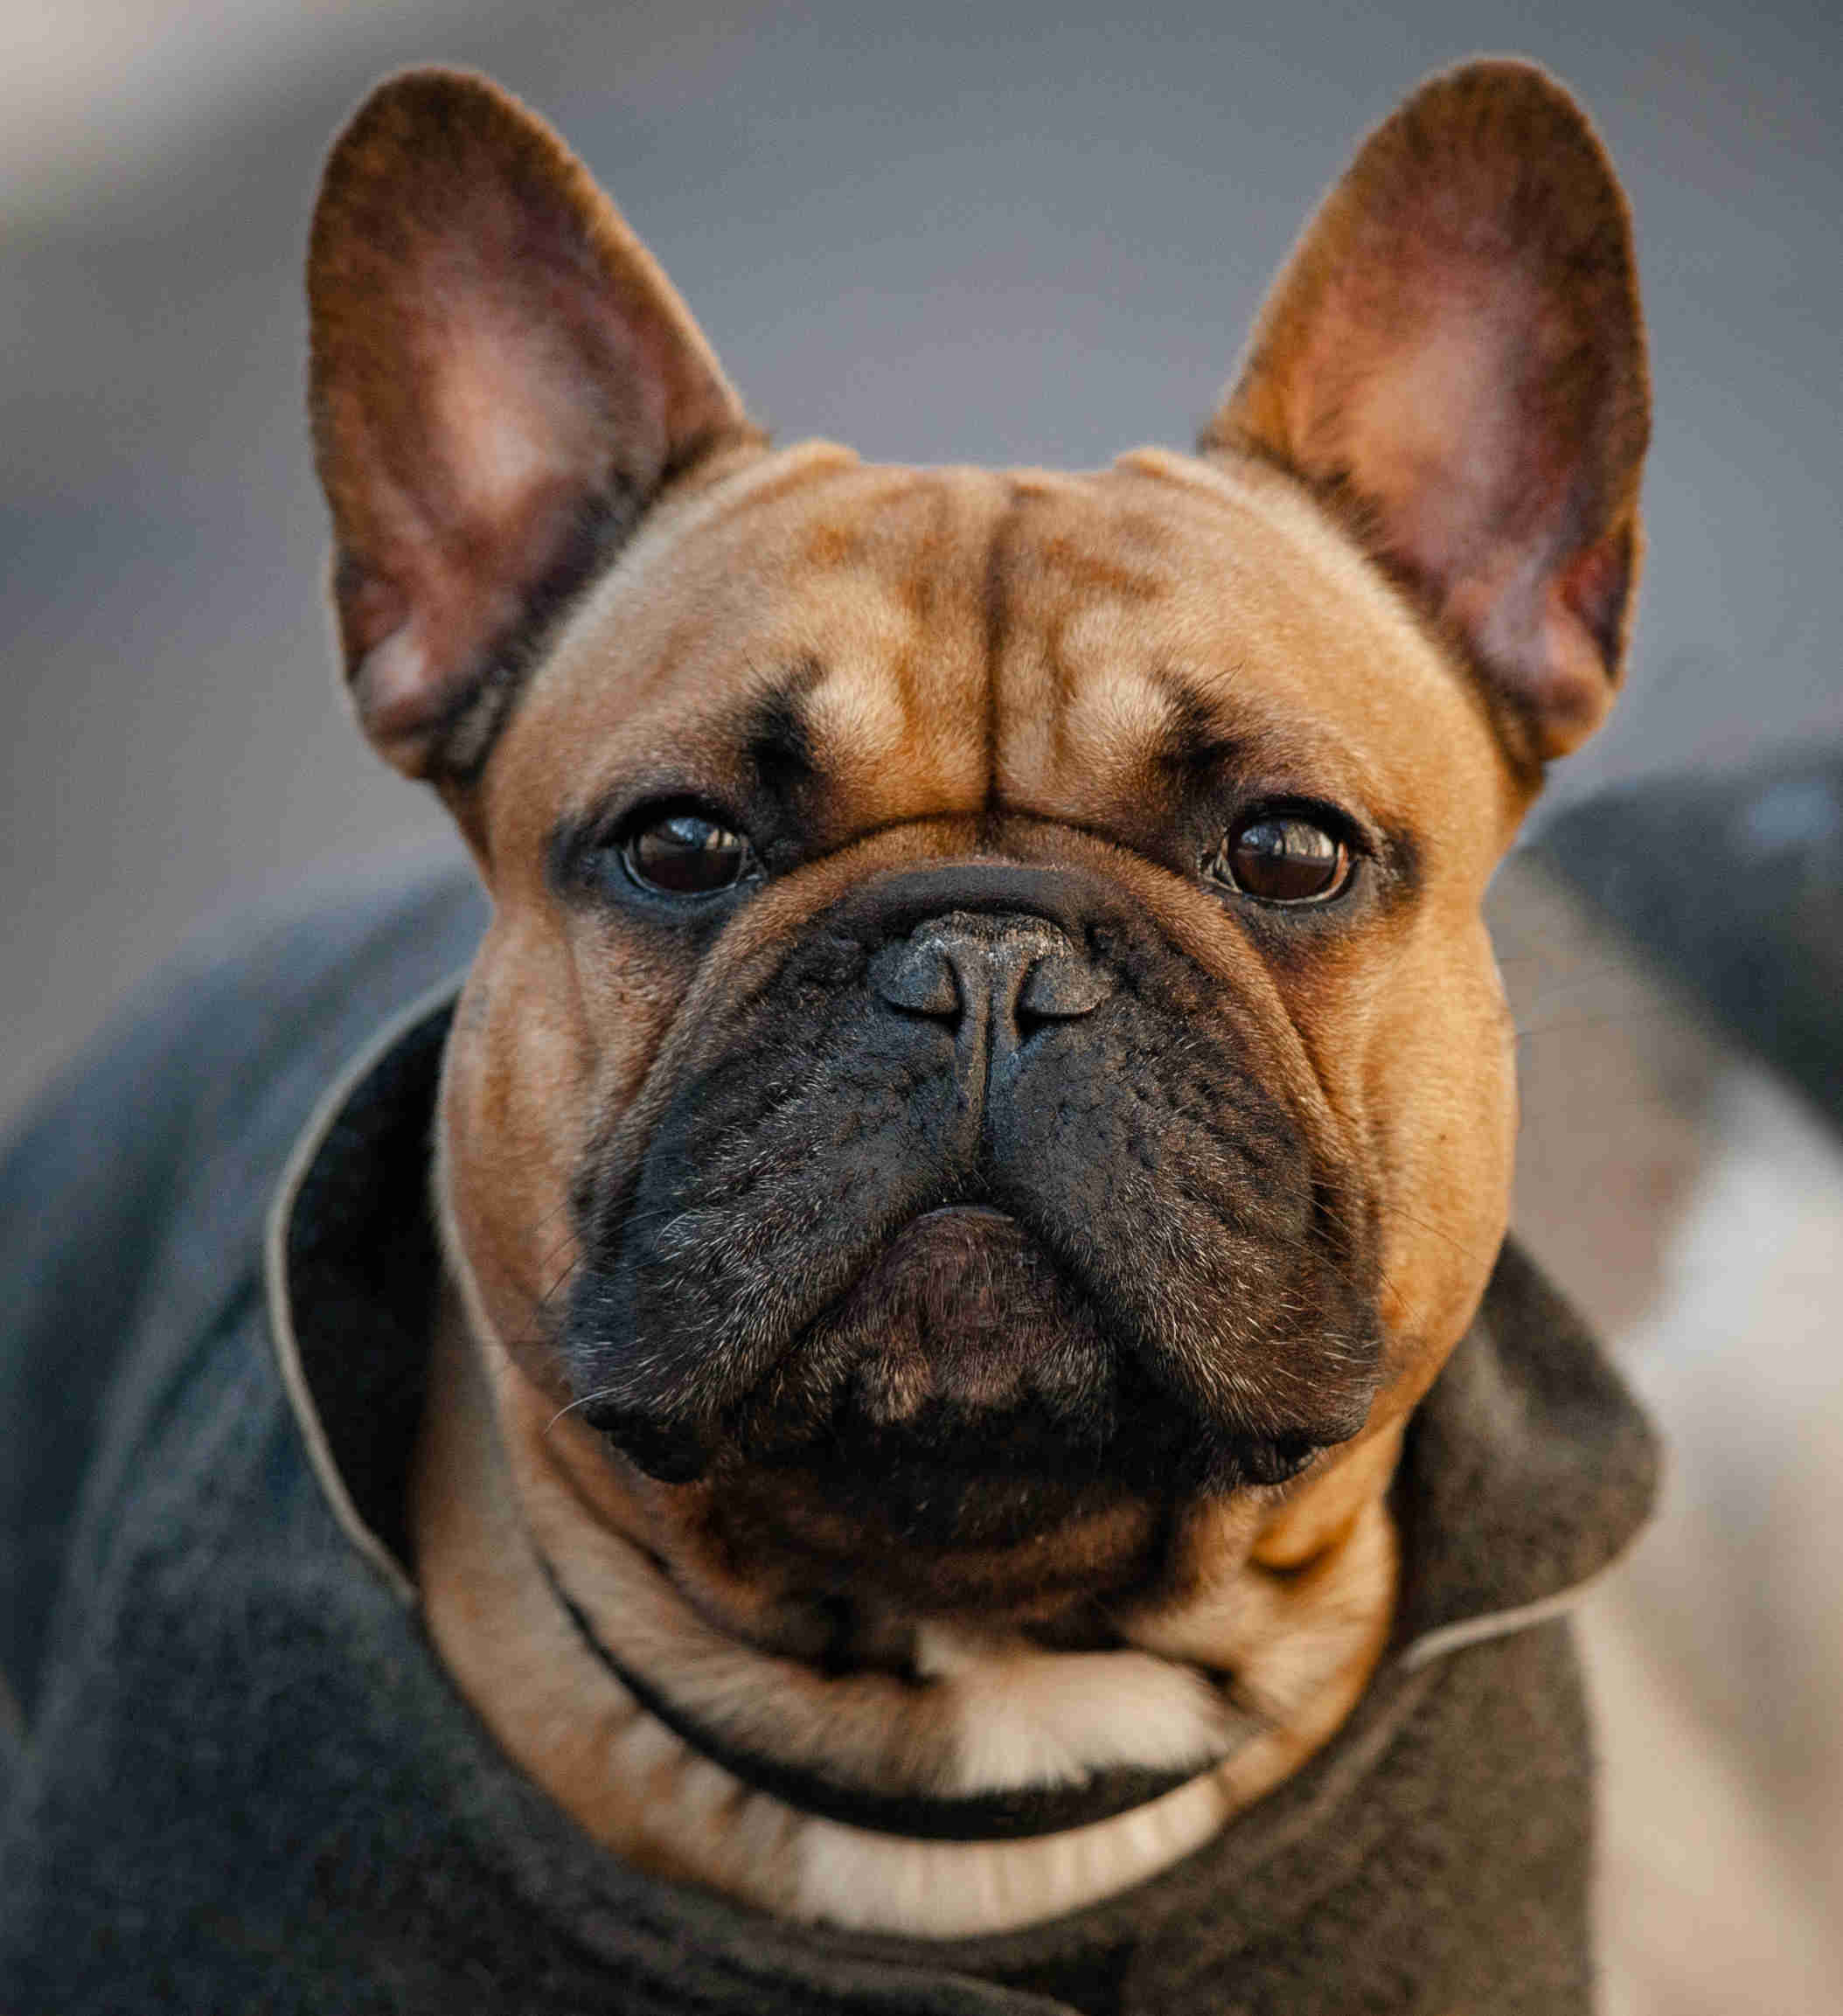 Leash Training 101: A Step-by-Step Guide to Teaching Your French Bulldog Puppy to Walk on a Leash